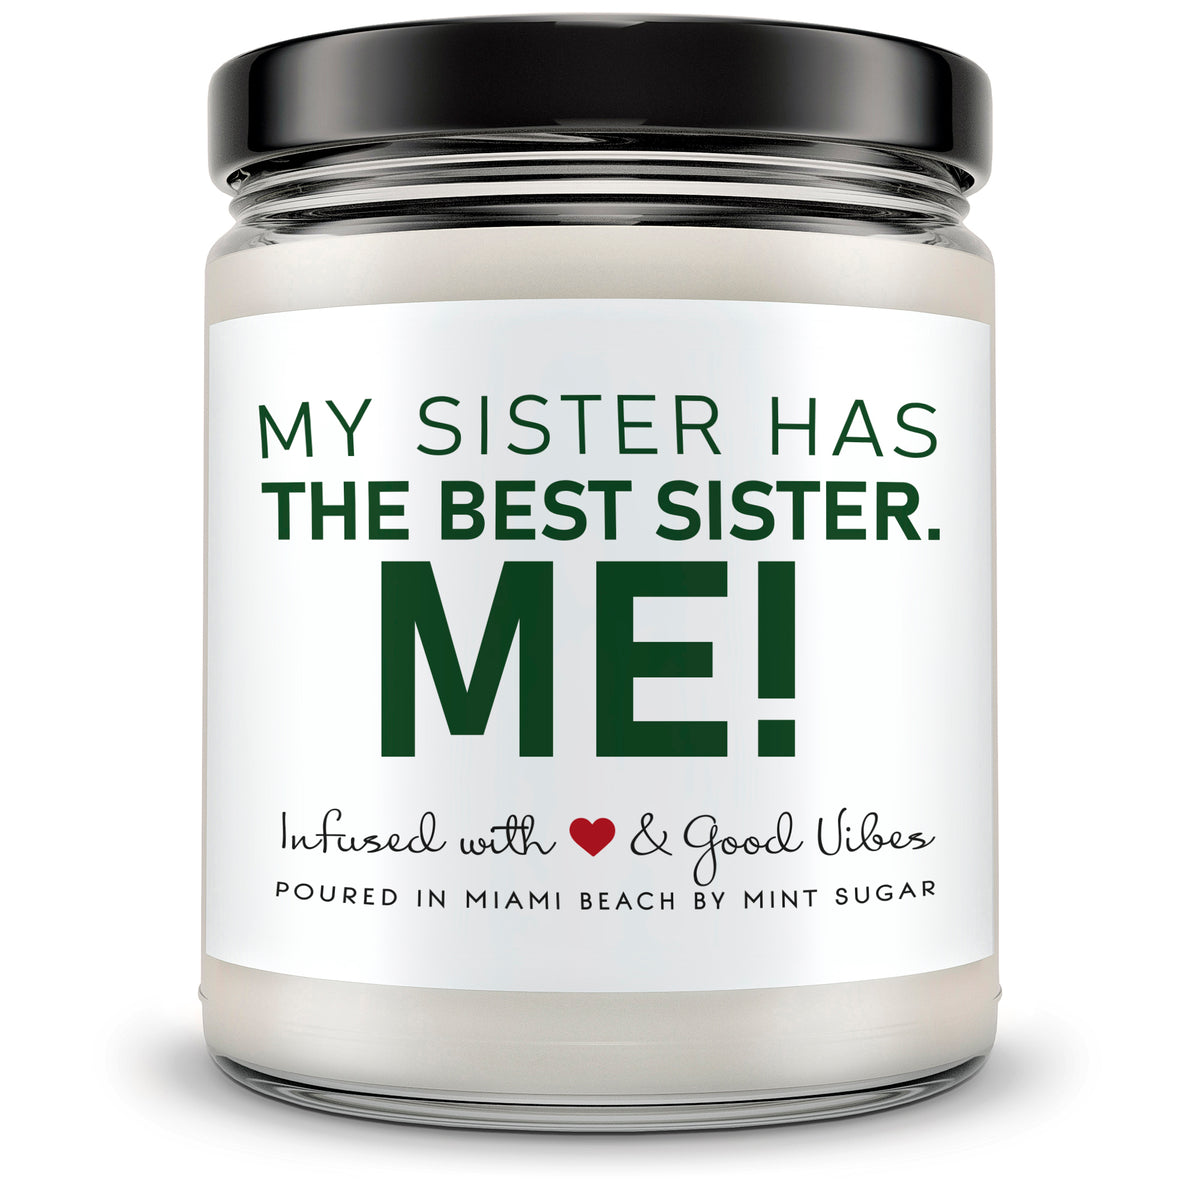 My Sister Has The Best Sister. Me! - Mint Sugar Candle